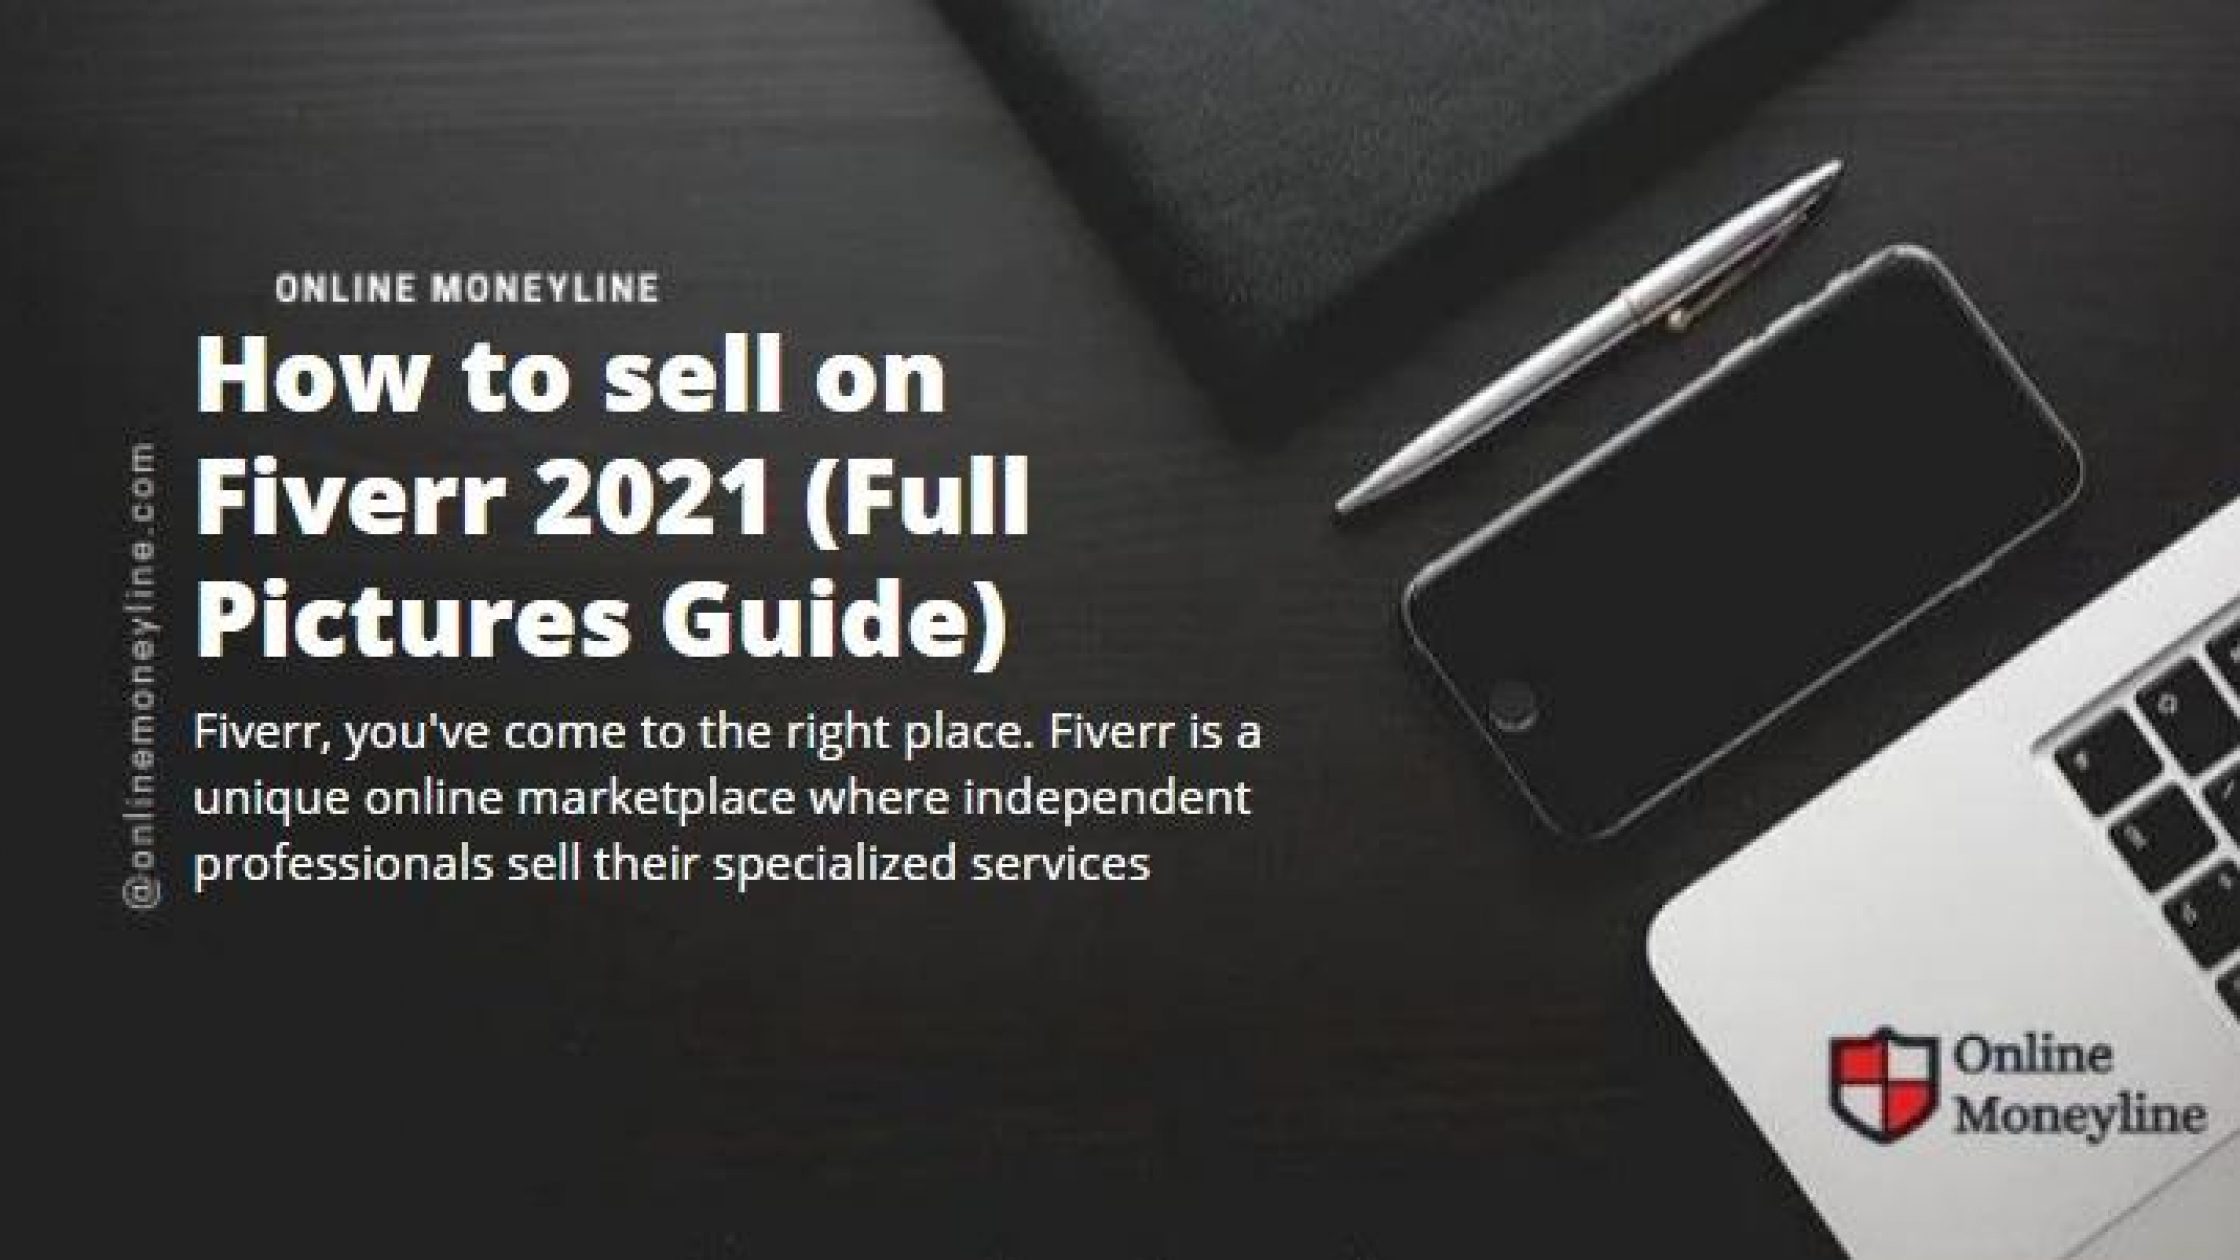 How to sell on Fiverr 2021 (Full Pictures Guide)